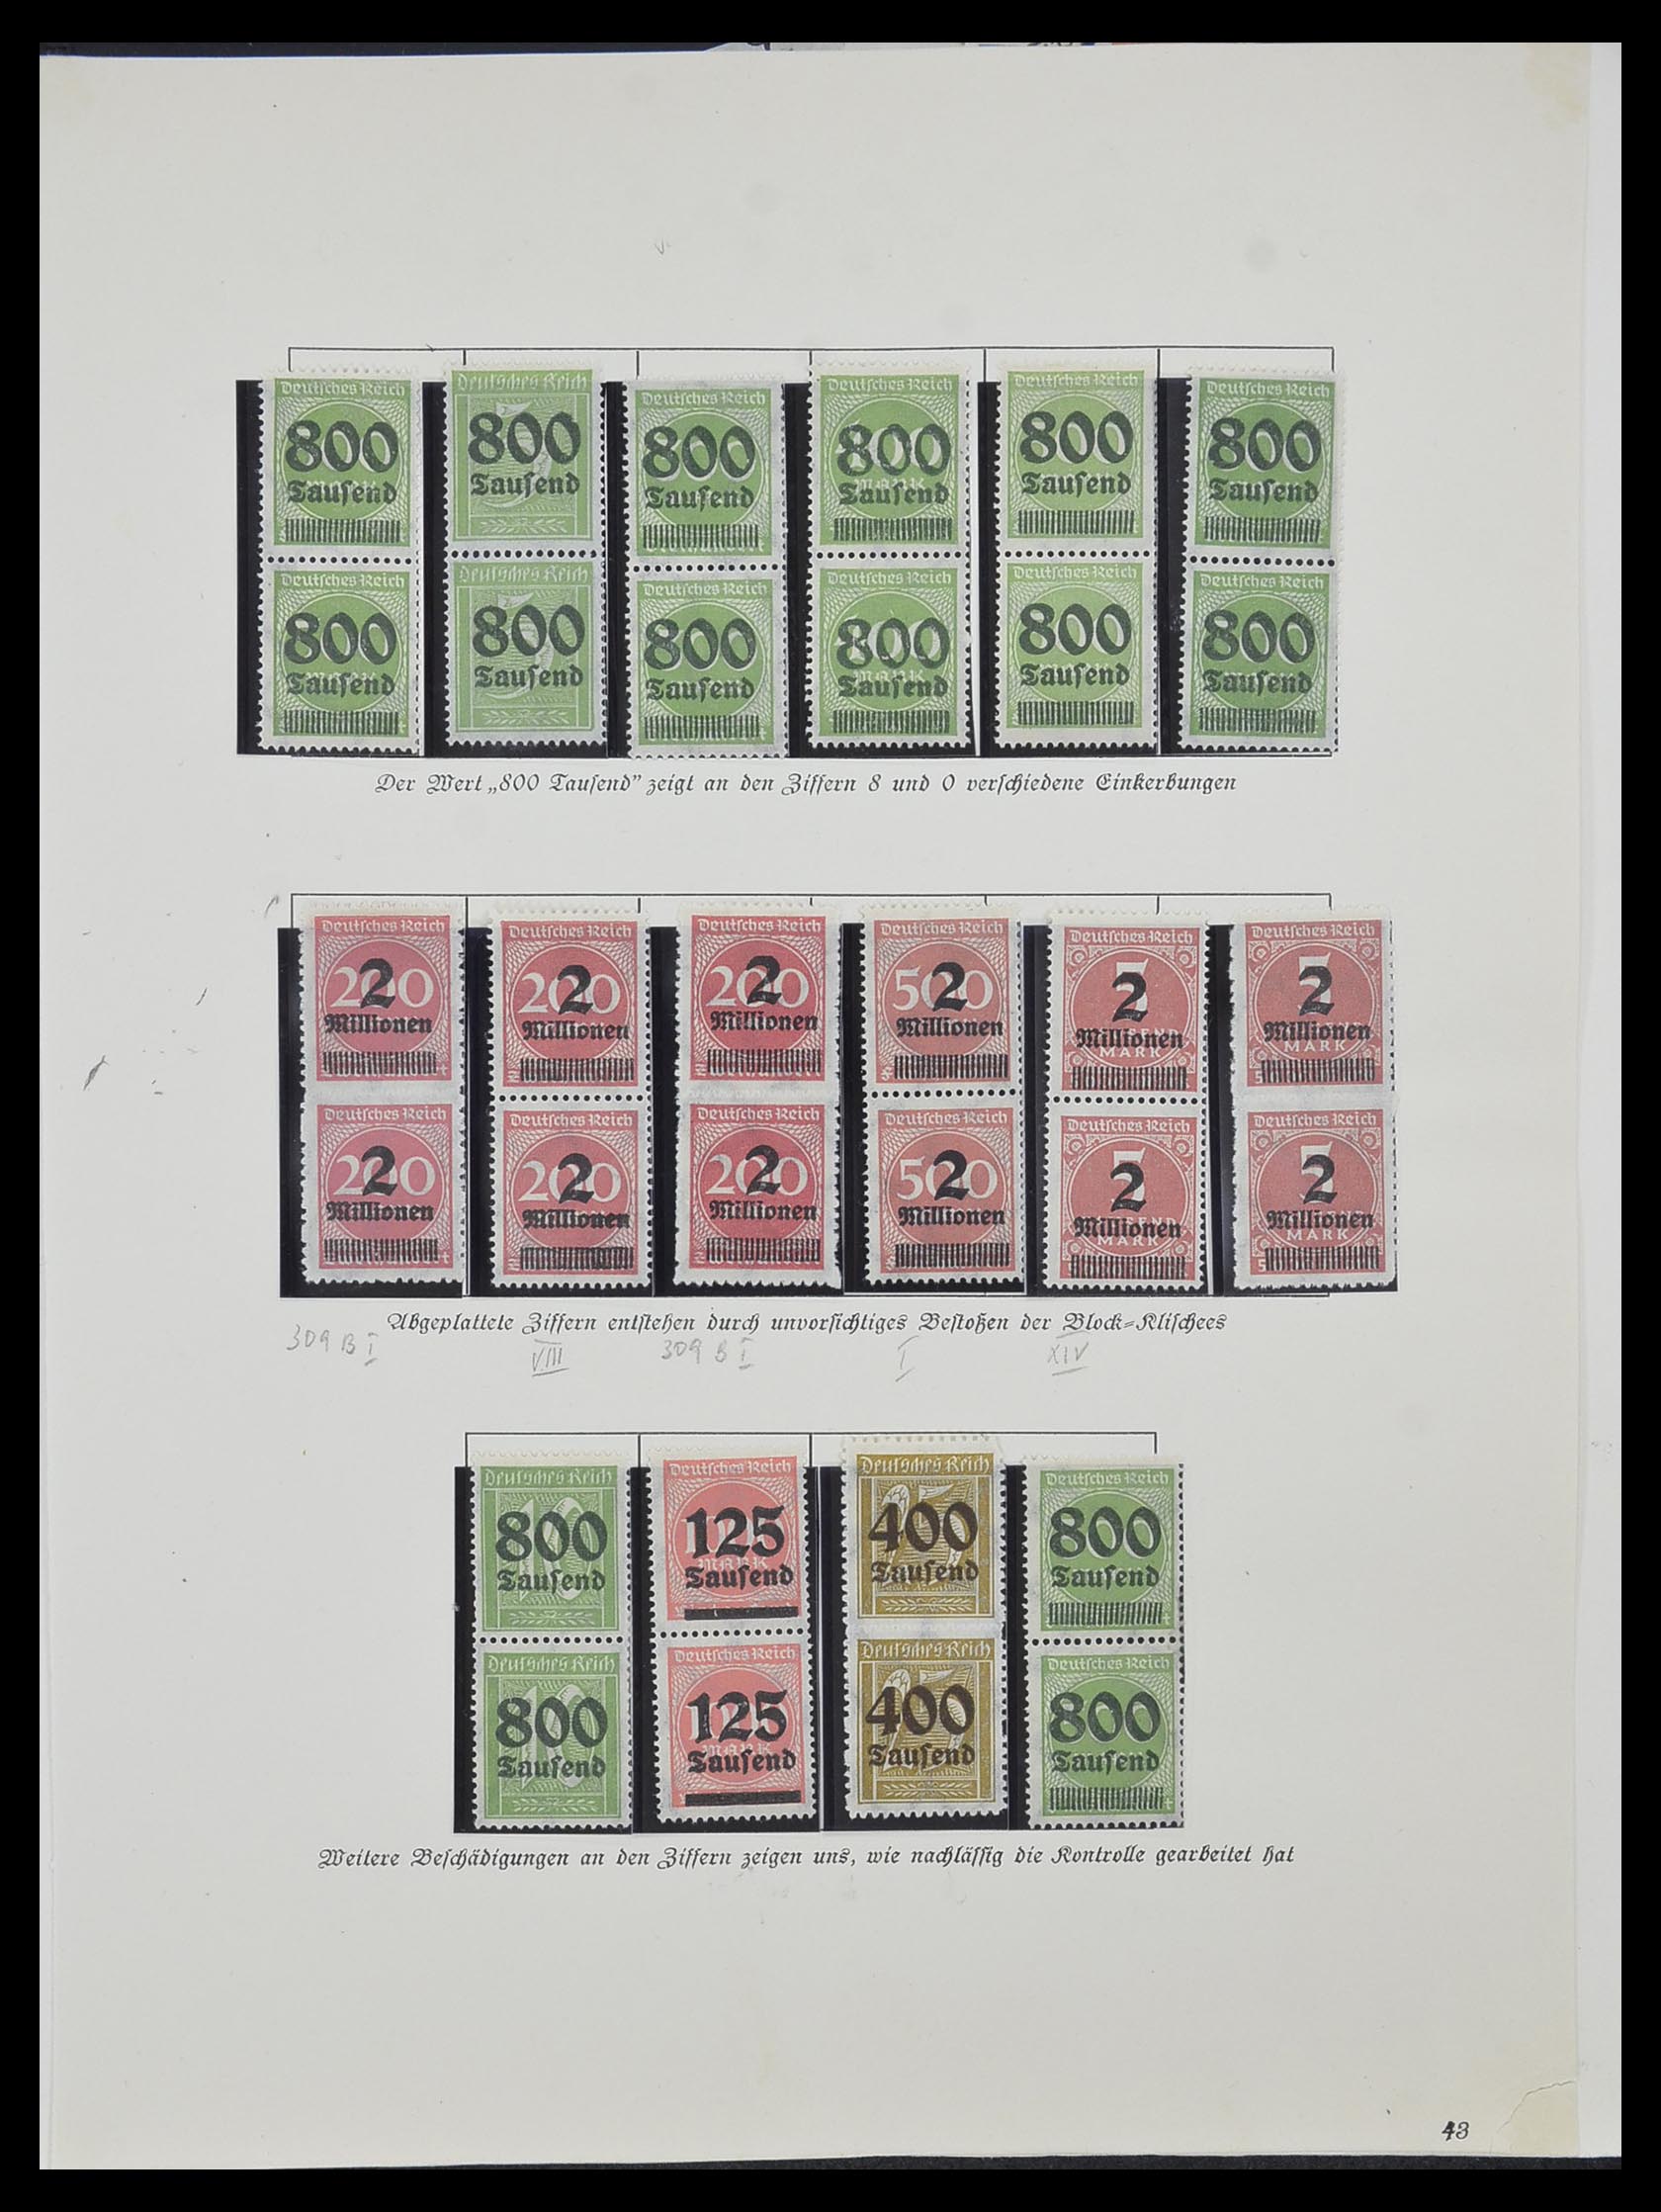 33957 019 - Stamp collection 33957 German Reich infla 1923.